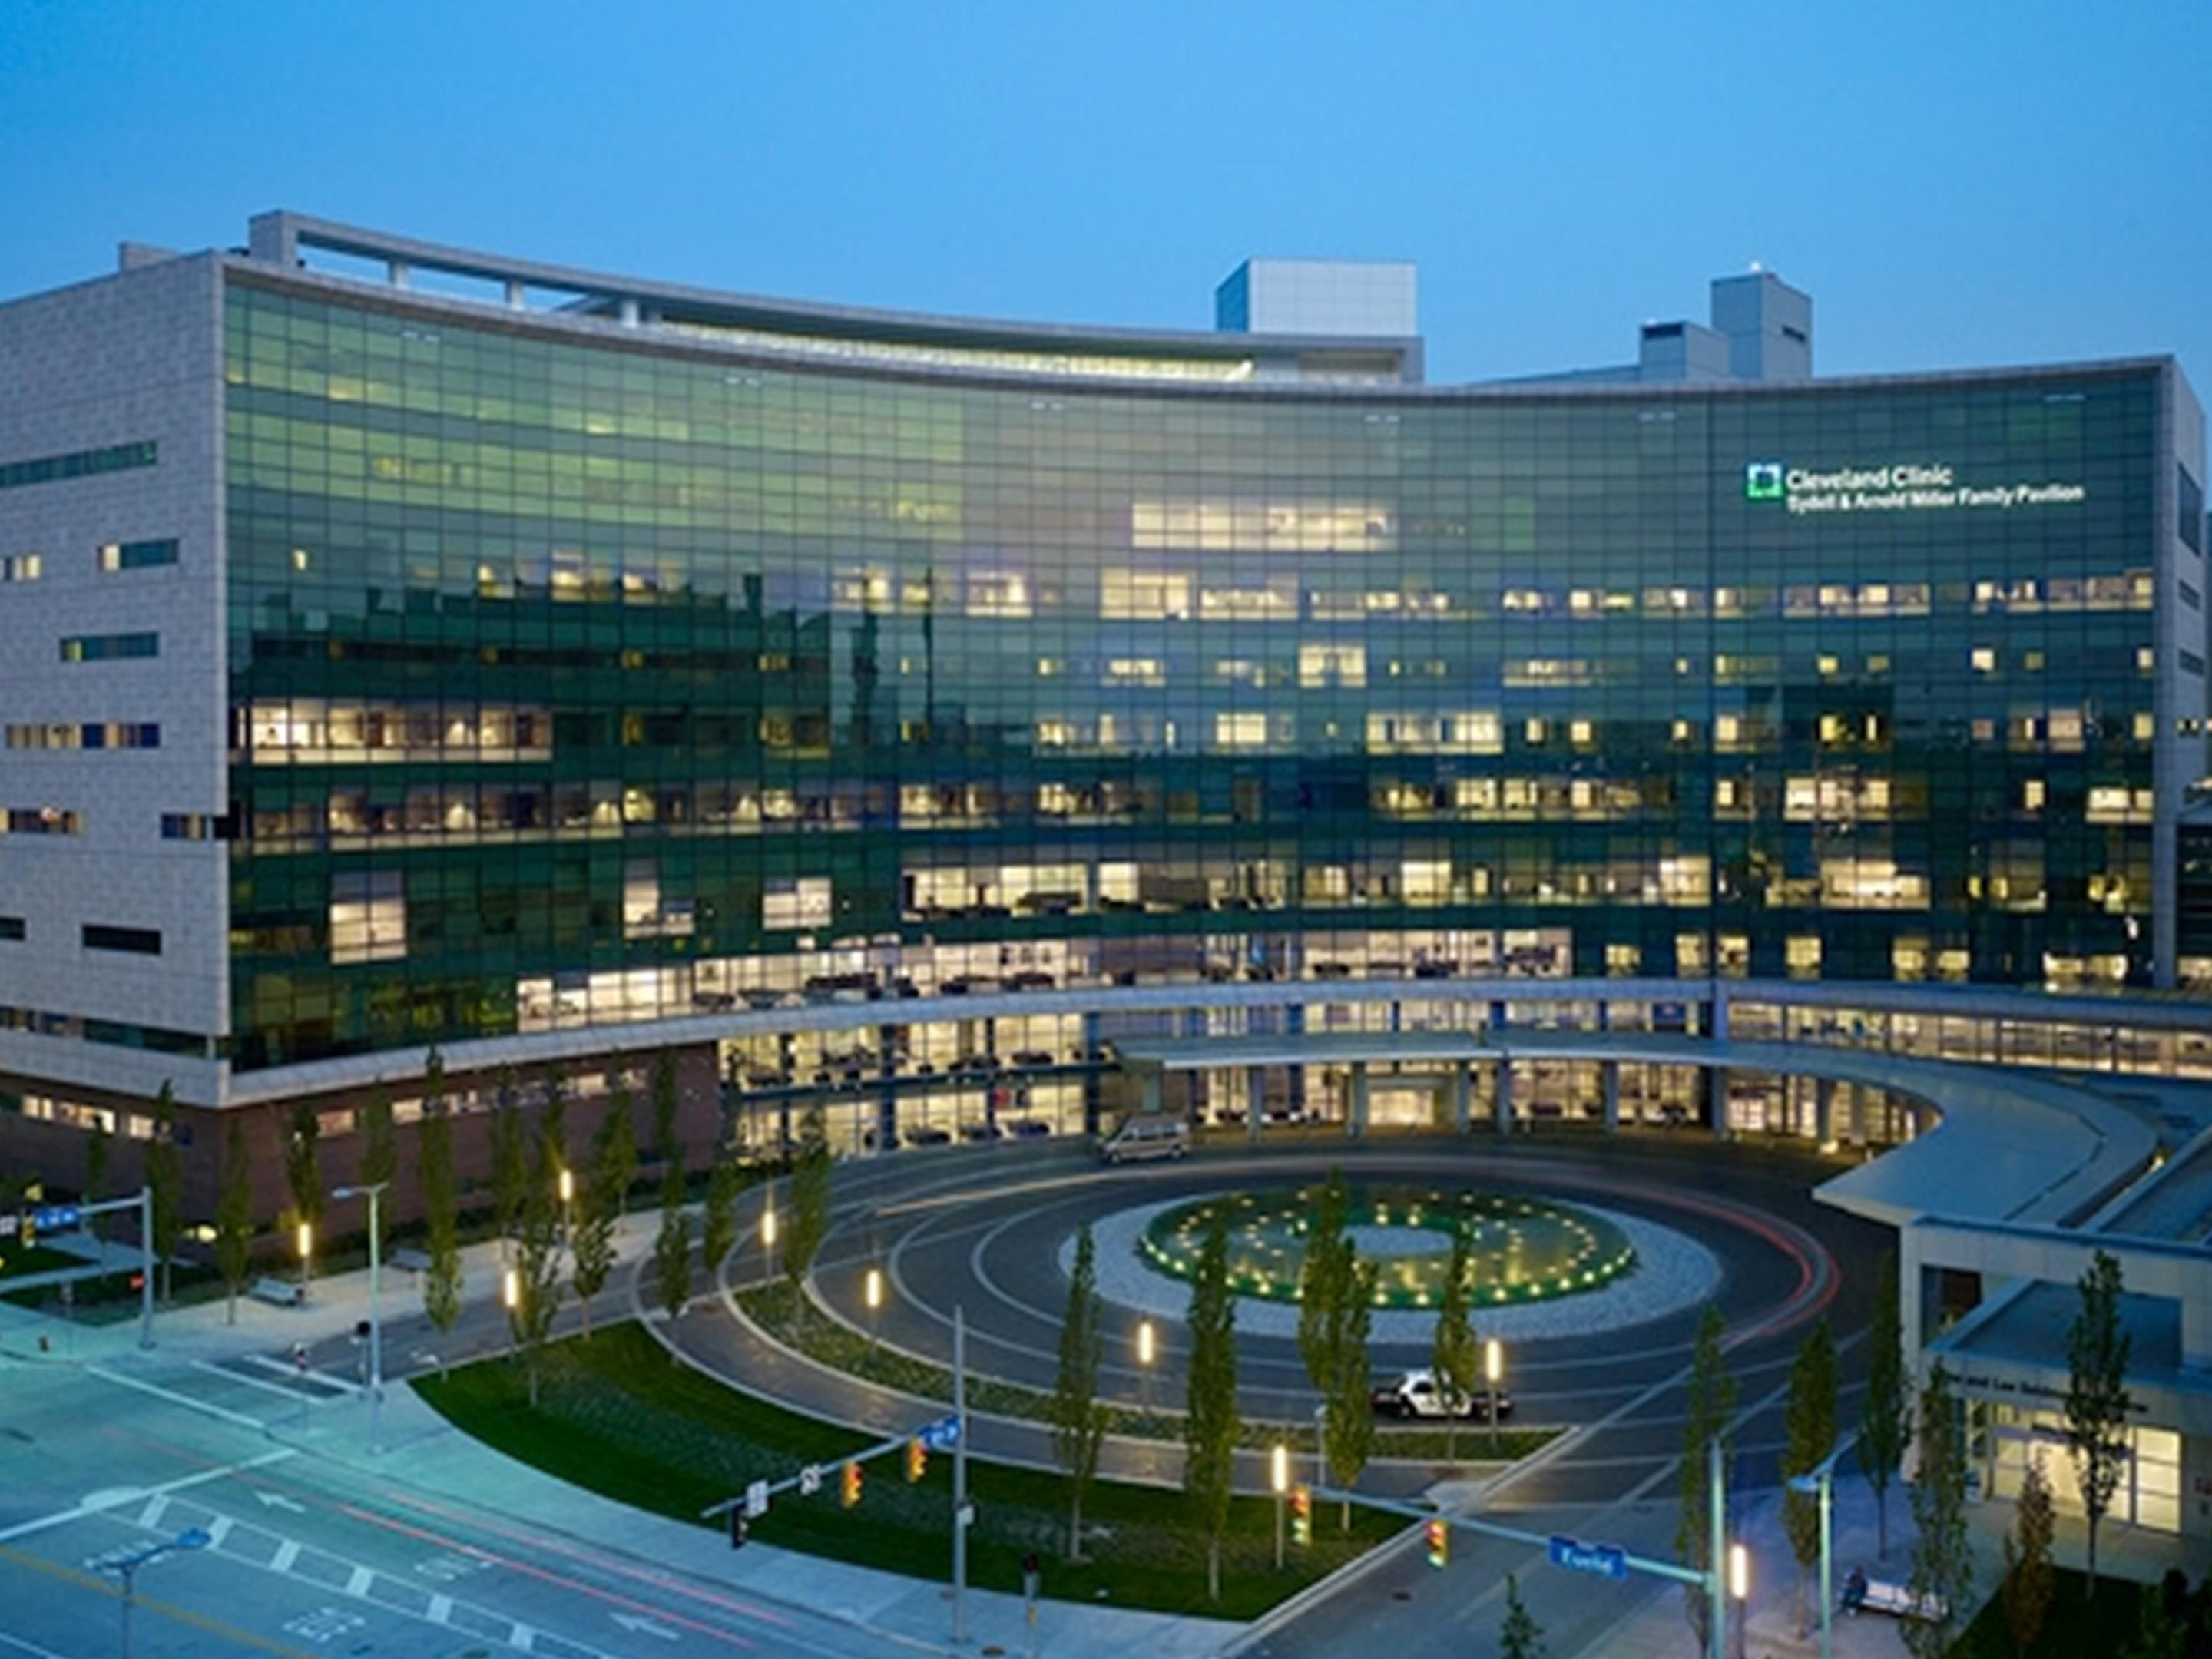 The Cleveland Clinic Main Campus is one of the largest and most revered academic medical centers in the country. With over 1,400 beds on site and over 3,600 physicians, scientists, and researchers, the Cleveland Clinic is a pioneer and innovator in today's medicine. Hotel guests are serviced by the Cleveland Clinic shuttle running every 20 minutes.